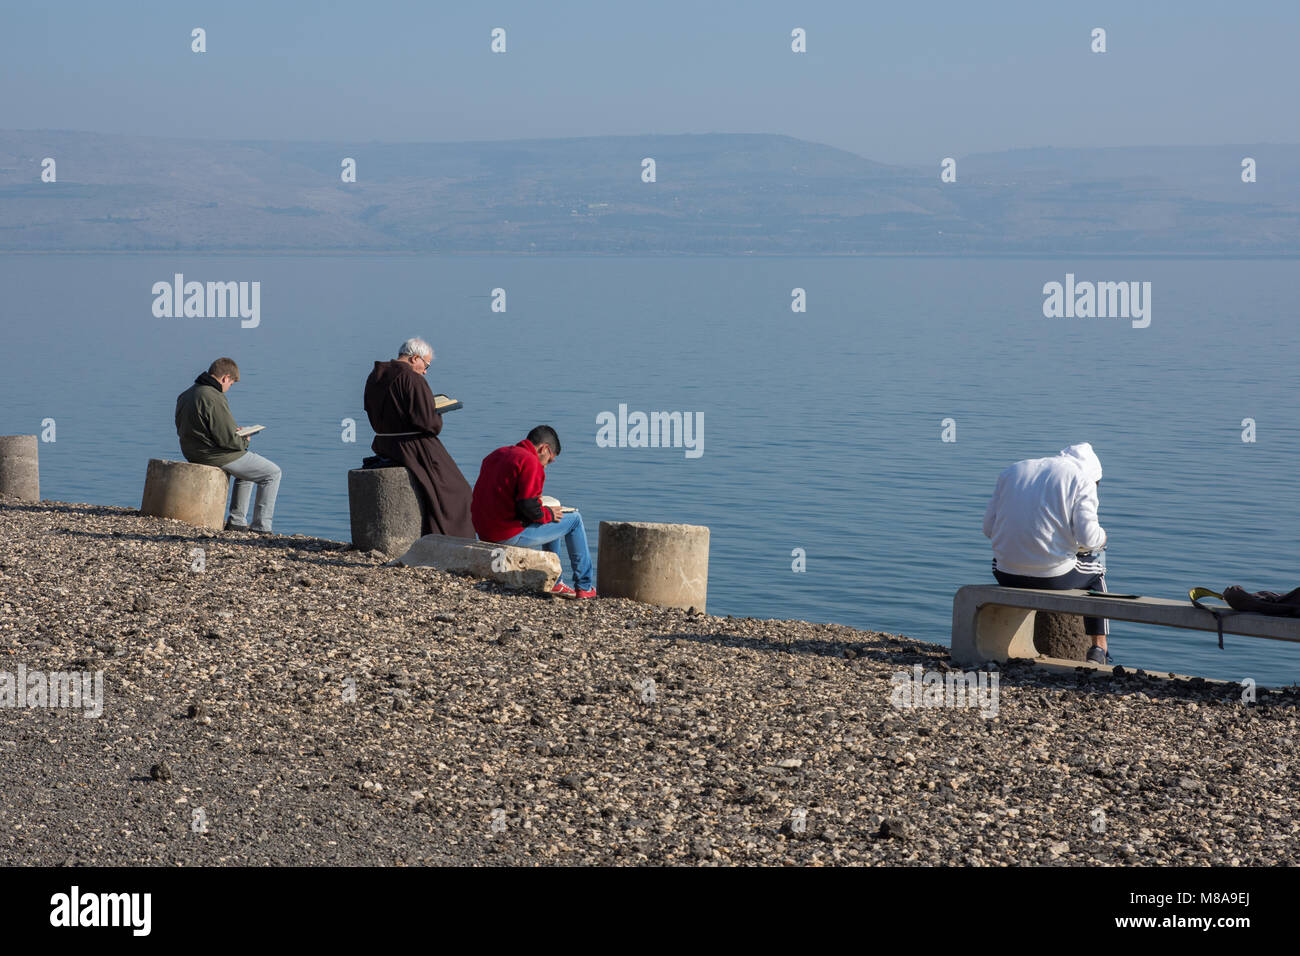 Praying at the Sea of Galilee at the Fransican Monastery at Capernaum, Israel Stock Photo